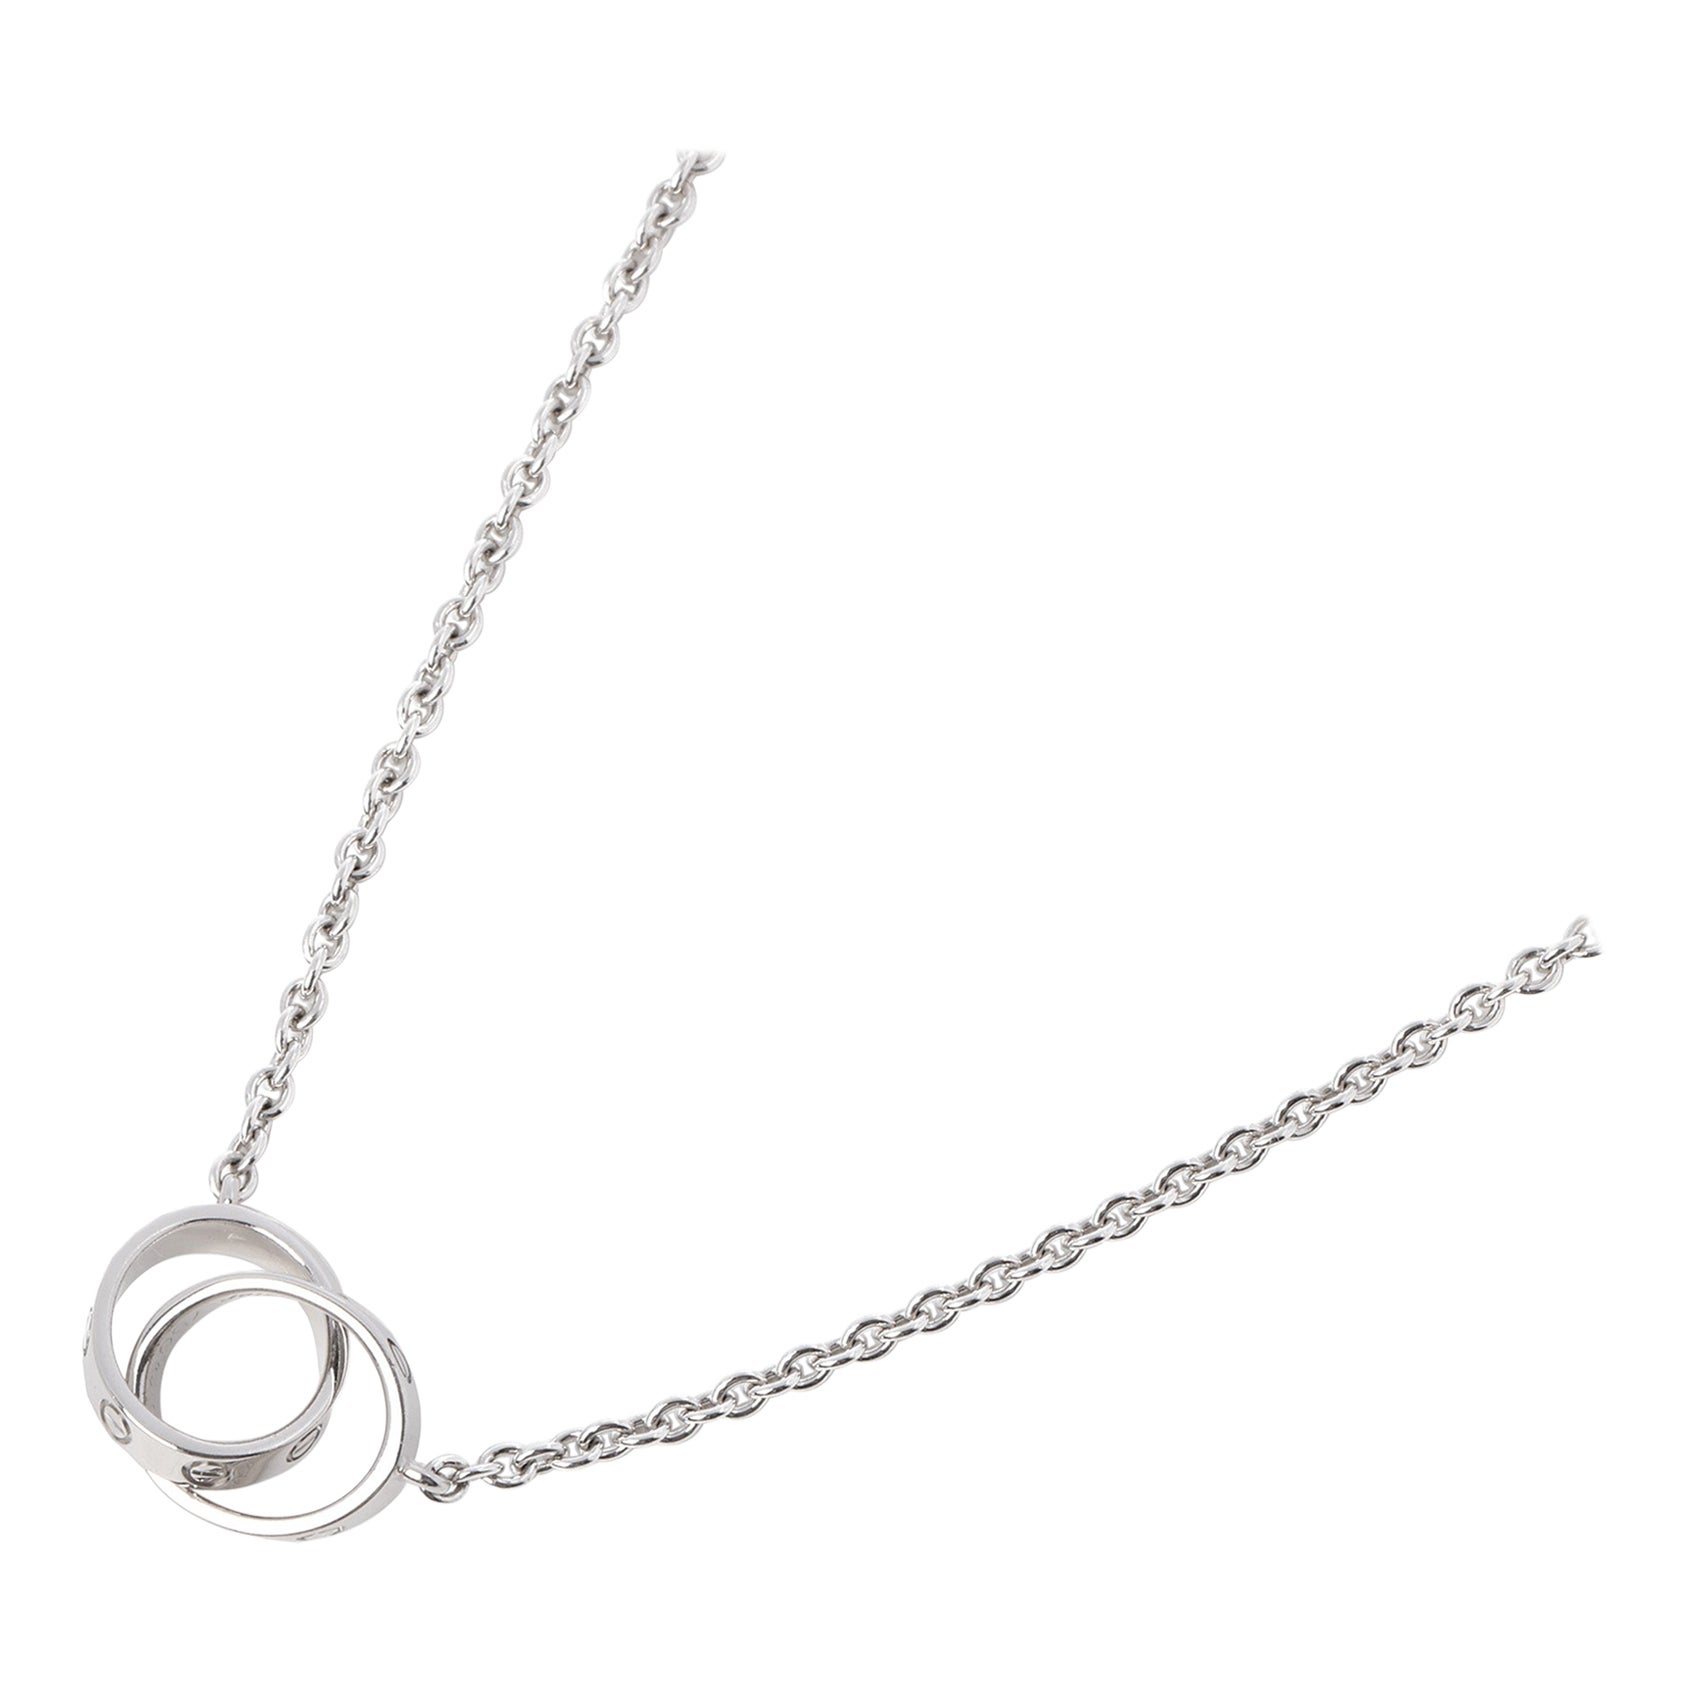 Cartier Love 18ct White Gold Necklace